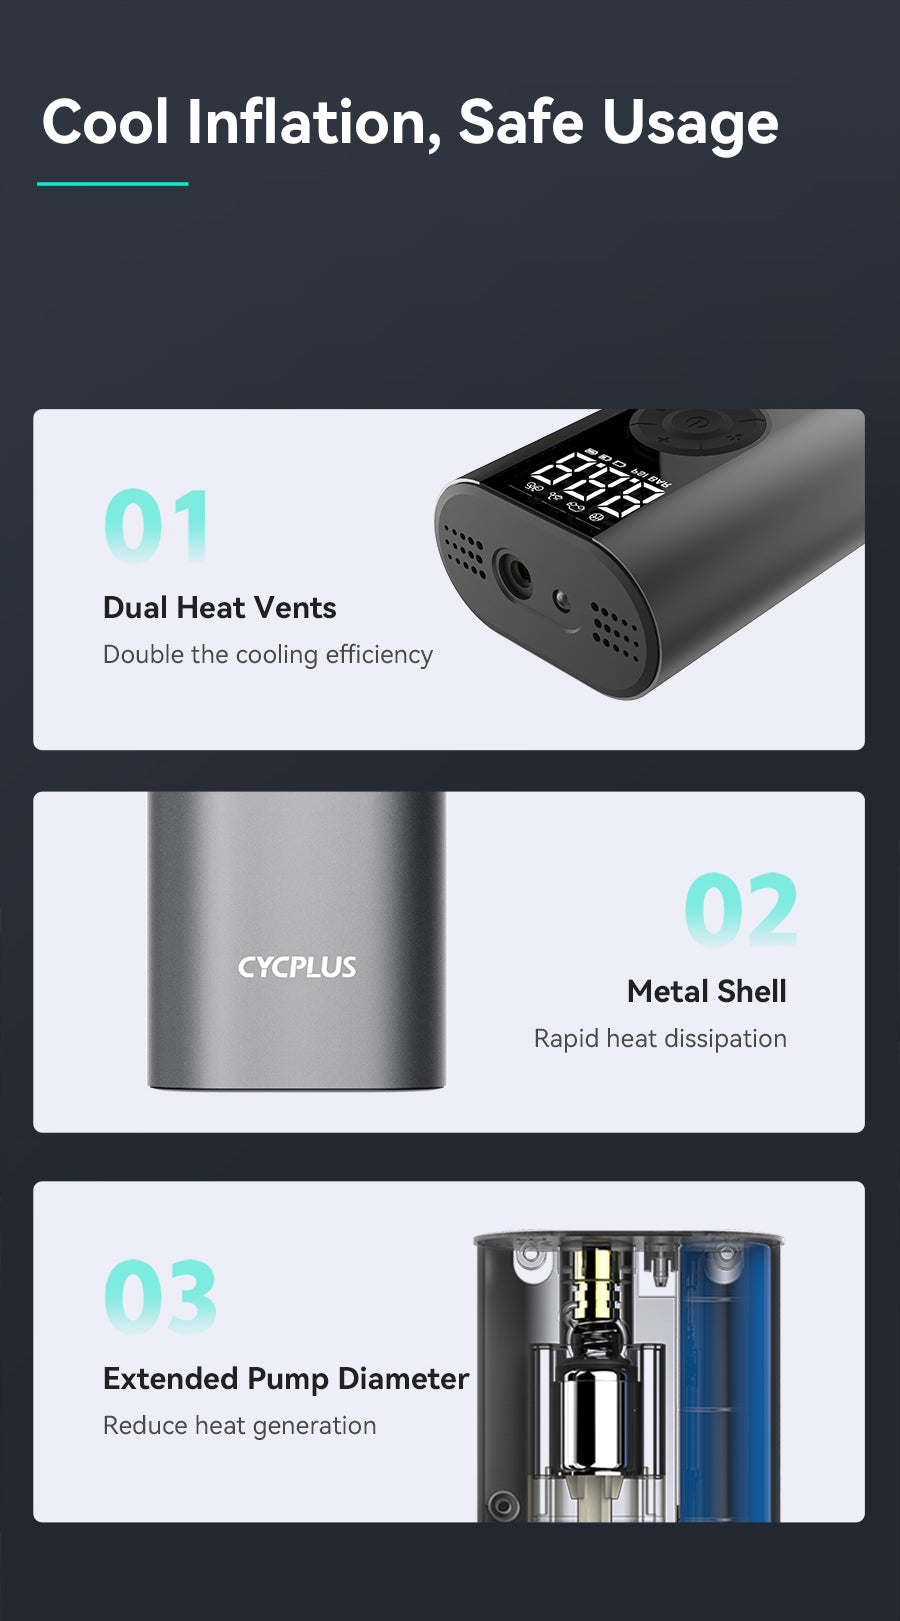 Cool Inflation. Safe Usage   01: Dual Heat Vents Double the cooling efficiency  02: Metal Shell Rapid heat dissipation  03: Extended Pump Diameter Reduce heat generation